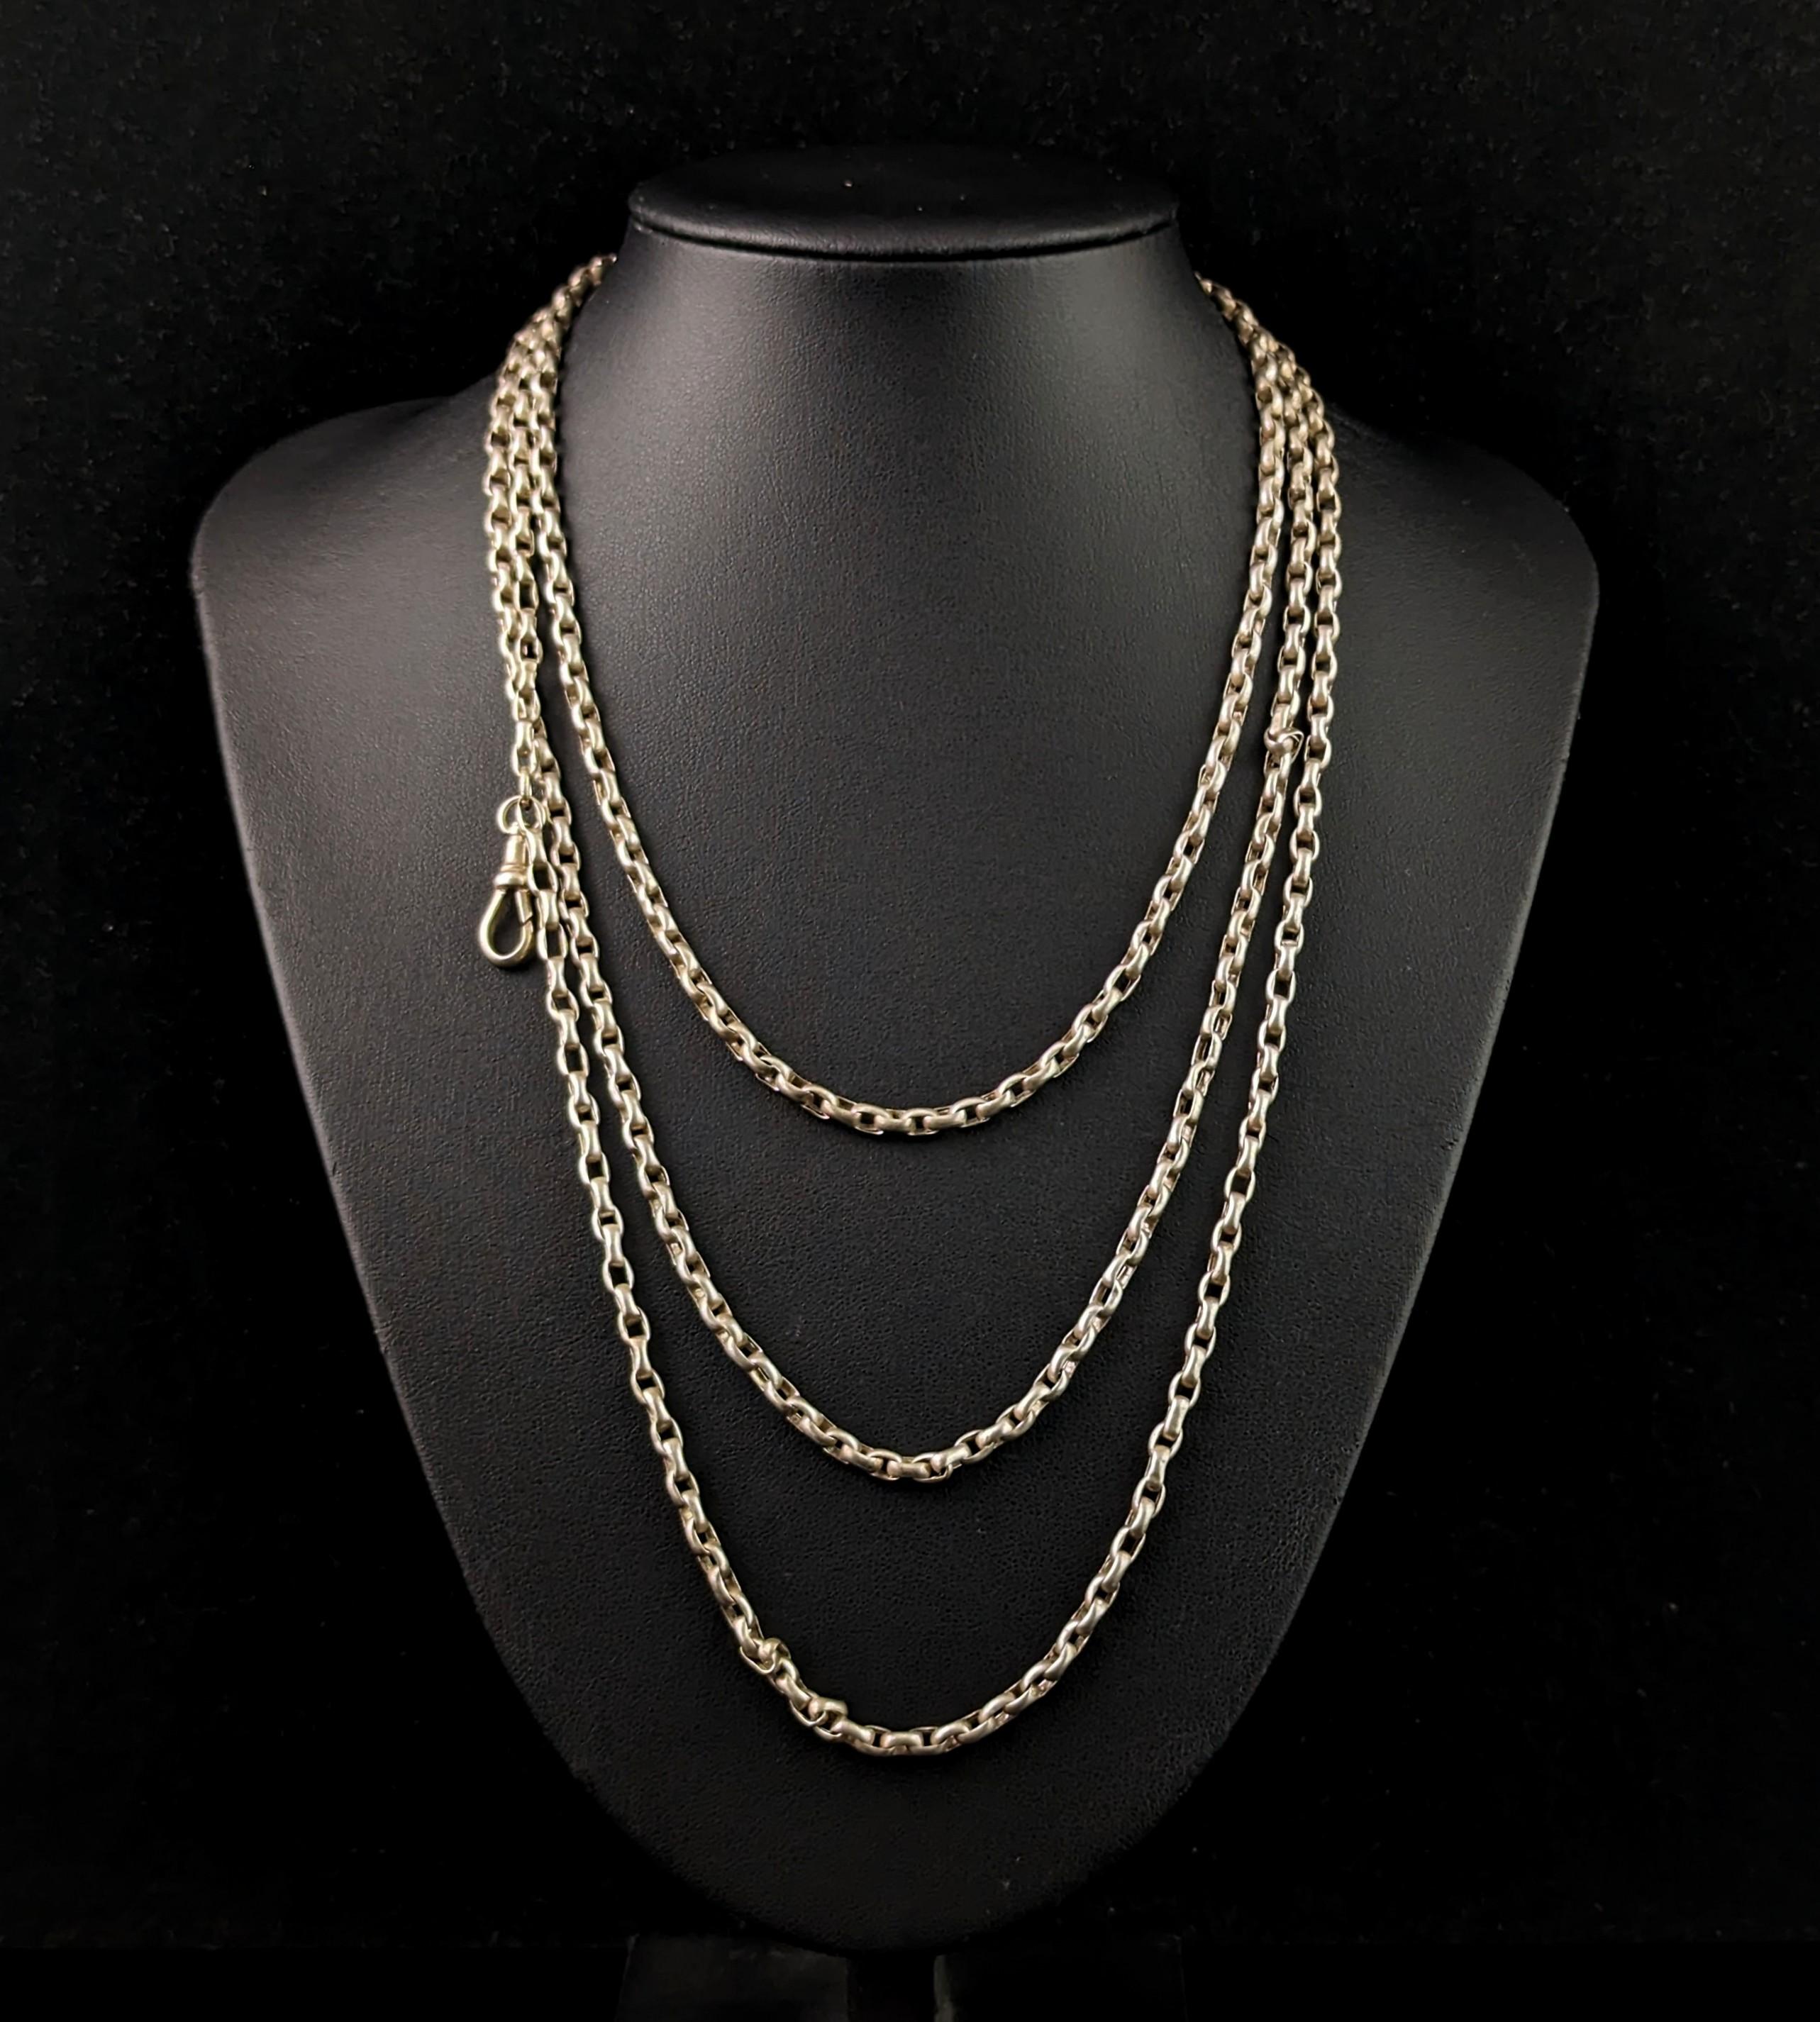 This gorgeous antique silver long chain or longuard chain necklace is everything you could hope for in a long chain.

It is a lovely long length chain at 64